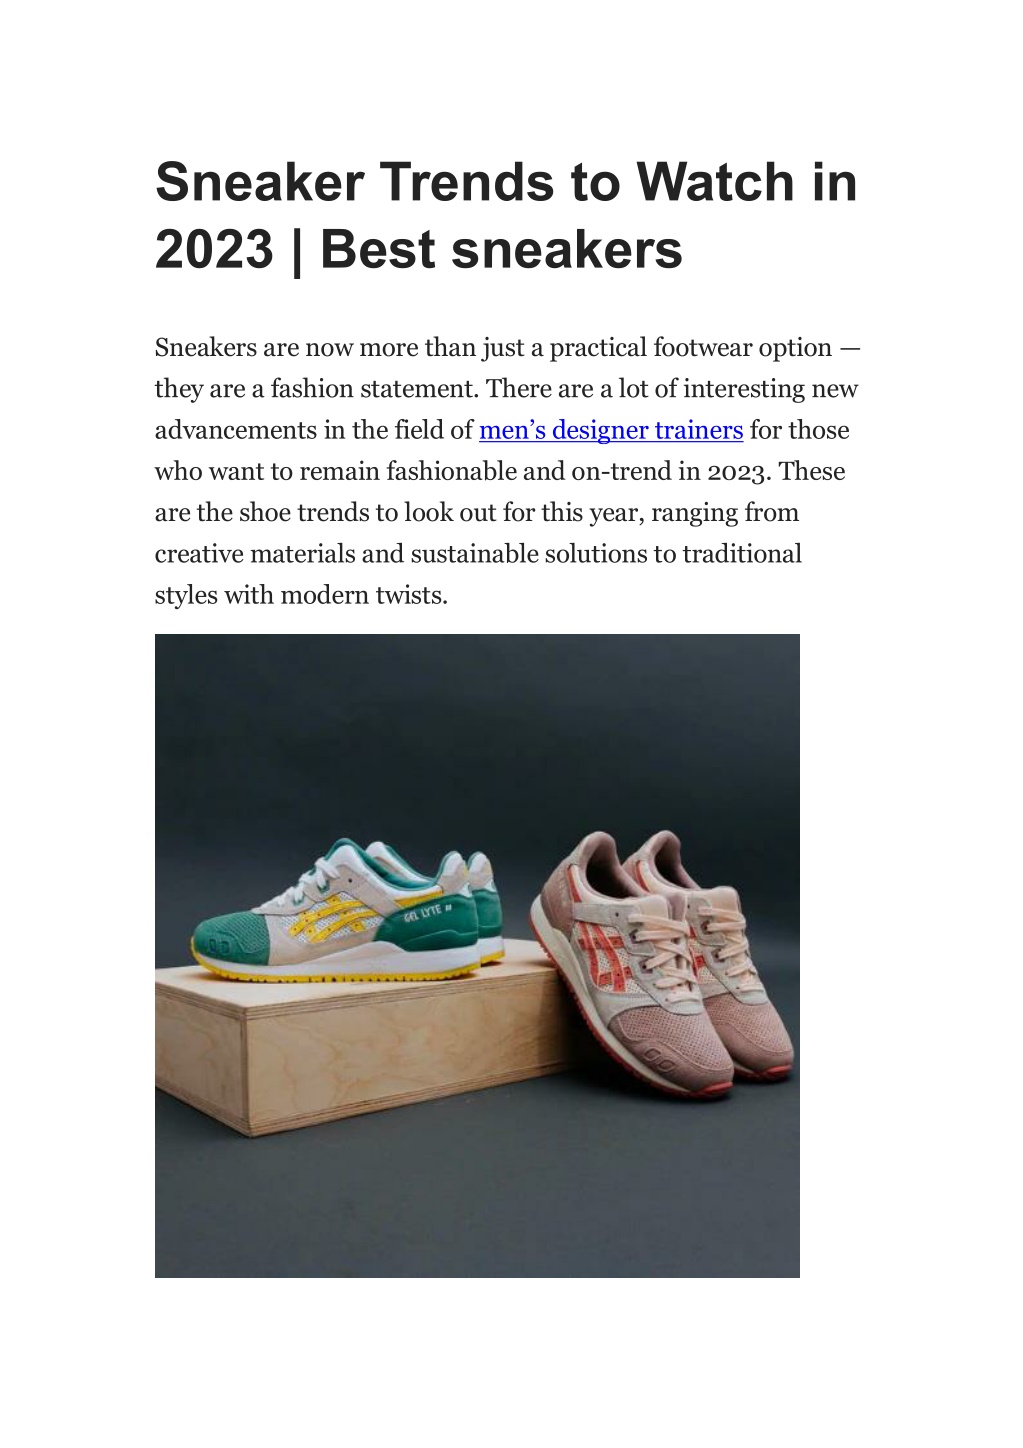 PPT - Sneaker Trends to Watch in 2023 PowerPoint Presentation